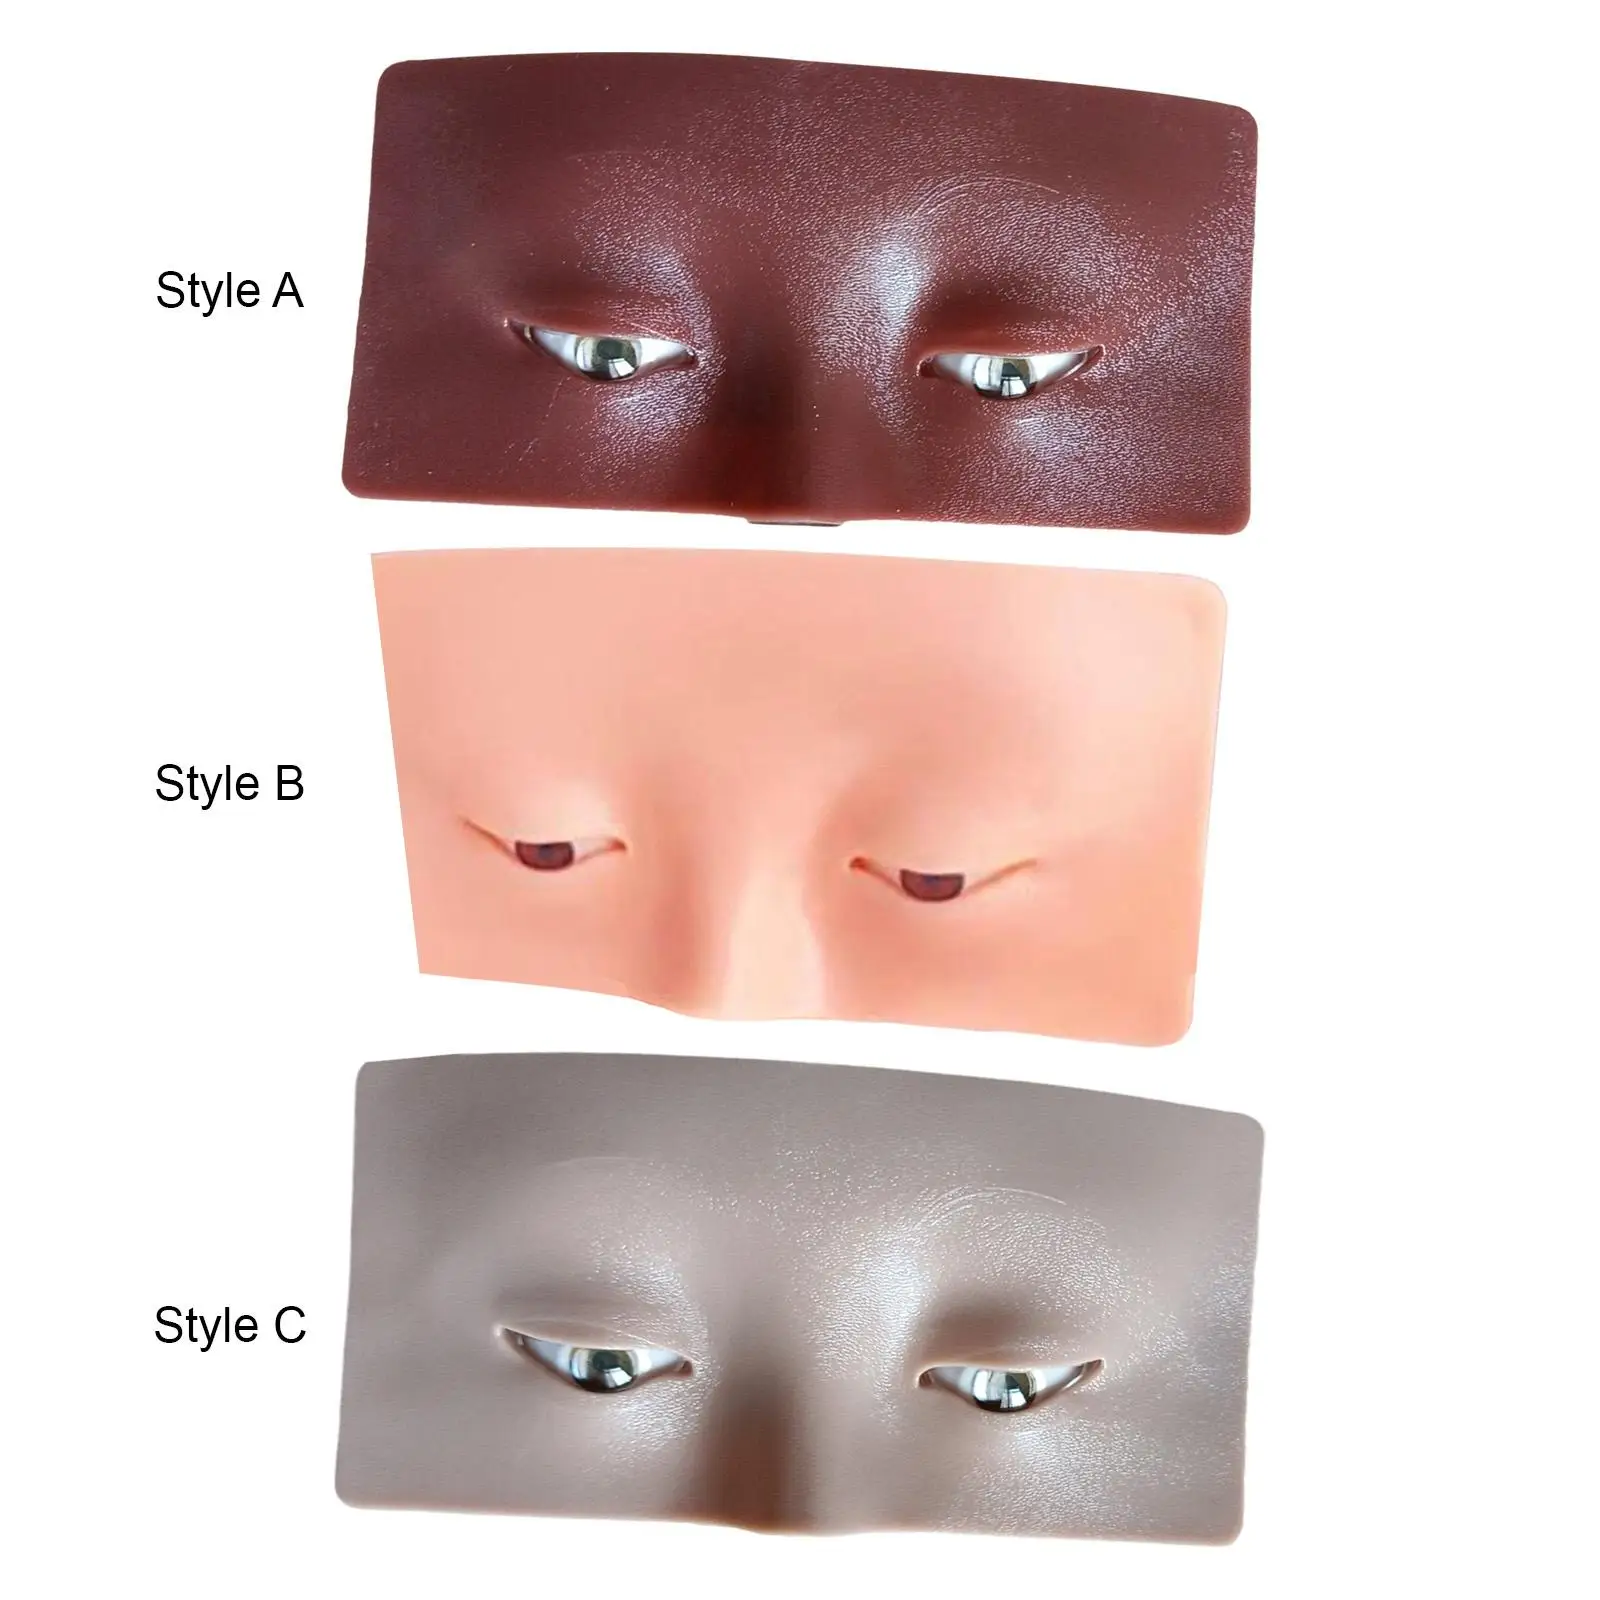 Eye Makeup Practice Face Reusable Beauty Tool Easy to Use for Makeup Training